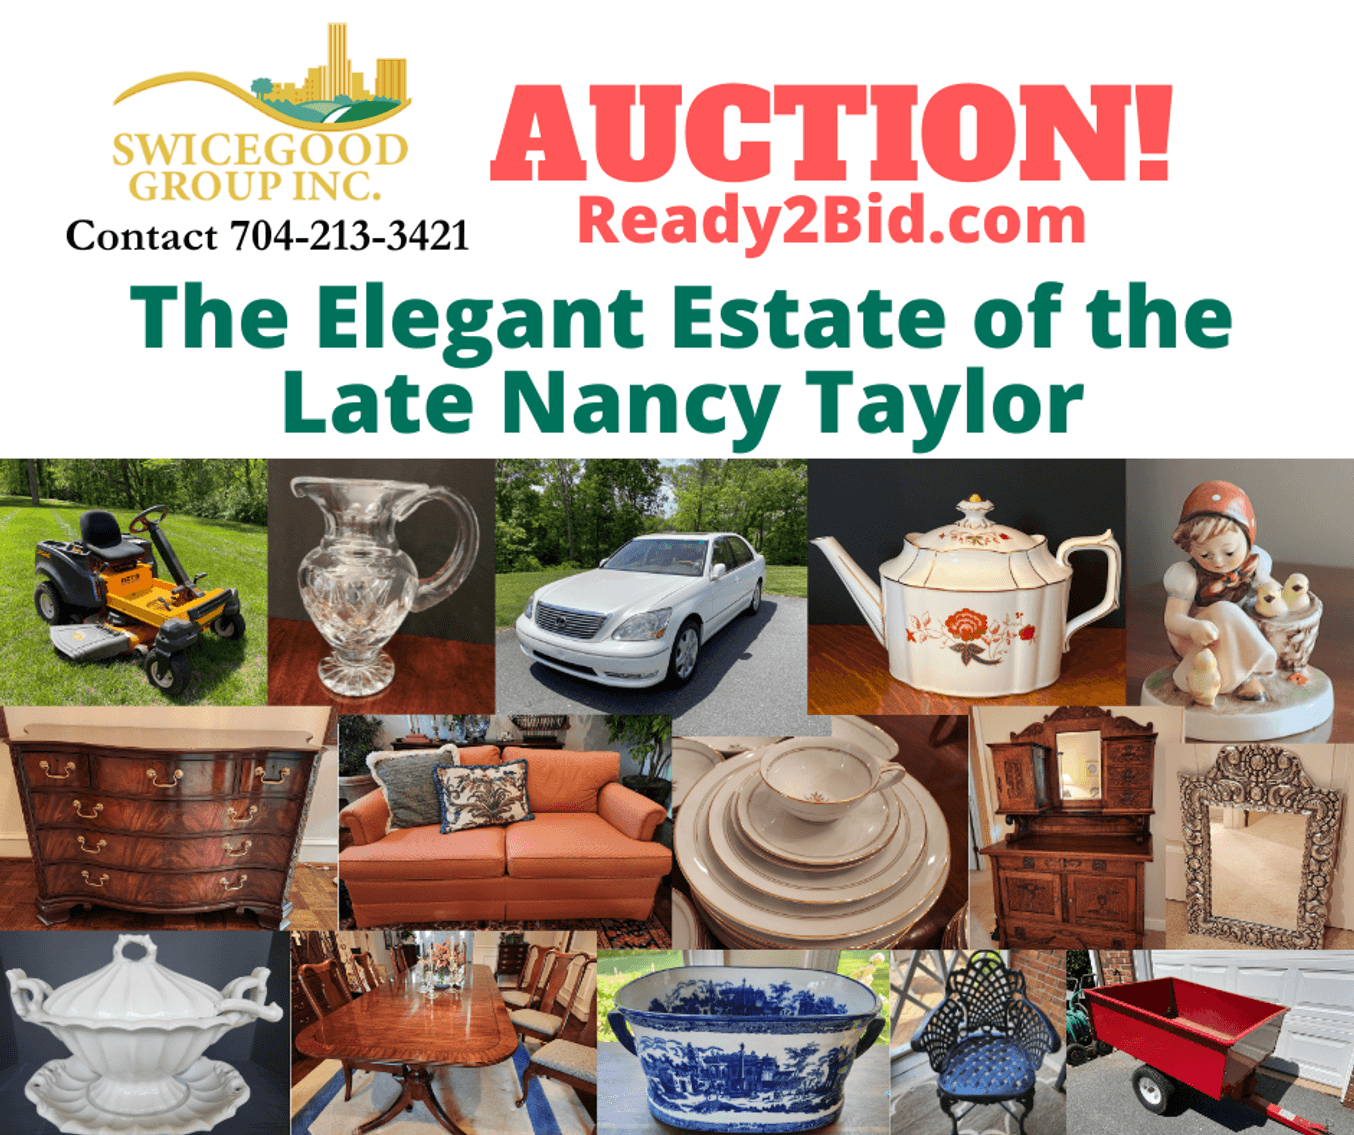 The Elegant Estate of the Late Nancy Taylor